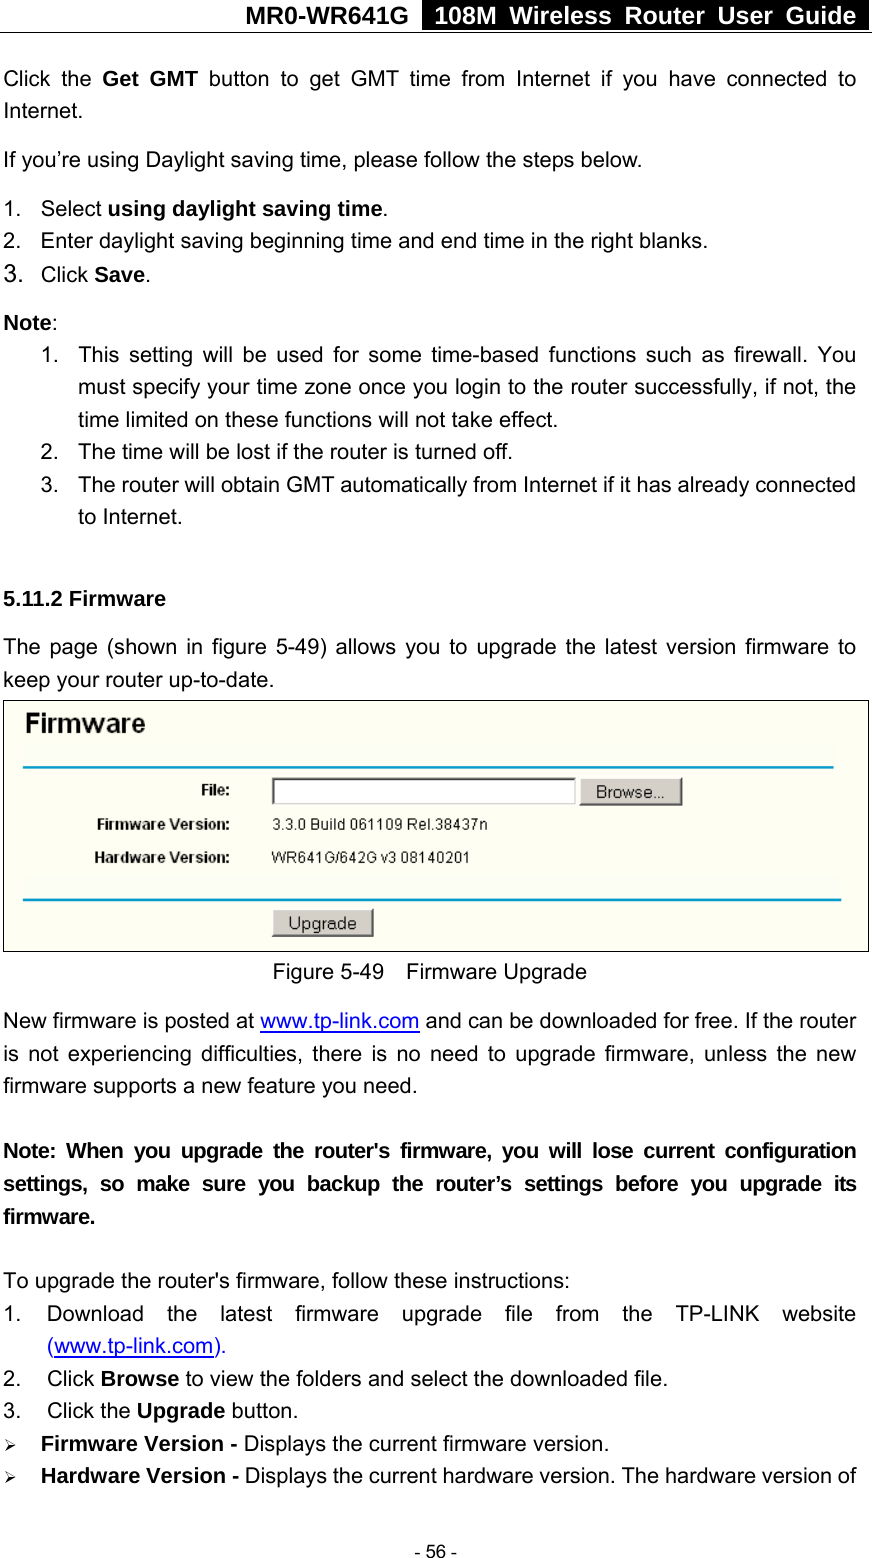 MR0-WR641G   108M Wireless Router User Guide  Click the Get GMT button to get GMT time from Internet if you have connected to Internet.  If you’re using Daylight saving time, please follow the steps below. 1. Select using daylight saving time.  2.  Enter daylight saving beginning time and end time in the right blanks.   3.  Click Save.  Note:  1.  This setting will be used for some time-based functions such as firewall. You must specify your time zone once you login to the router successfully, if not, the time limited on these functions will not take effect.   2.  The time will be lost if the router is turned off.   3.  The router will obtain GMT automatically from Internet if it has already connected to Internet.  5.11.2 Firmware The page (shown in figure 5-49) allows you to upgrade the latest version firmware to keep your router up-to-date.  Figure 5-49  Firmware Upgrade New firmware is posted at www.tp-link.com and can be downloaded for free. If the router is not experiencing difficulties, there is no need to upgrade firmware, unless the new firmware supports a new feature you need.  Note: When you upgrade the router&apos;s firmware, you will lose current configuration settings, so make sure you backup the router’s settings before you upgrade its firmware.  To upgrade the router&apos;s firmware, follow these instructions: 1.  Download the latest firmware upgrade file from the TP-LINK website (www.tp-link.com).  2. Click Browse to view the folders and select the downloaded file.   3. Click the Upgrade button.   ¾ Firmware Version - Displays the current firmware version. ¾ Hardware Version - Displays the current hardware version. The hardware version of  - 56 - 